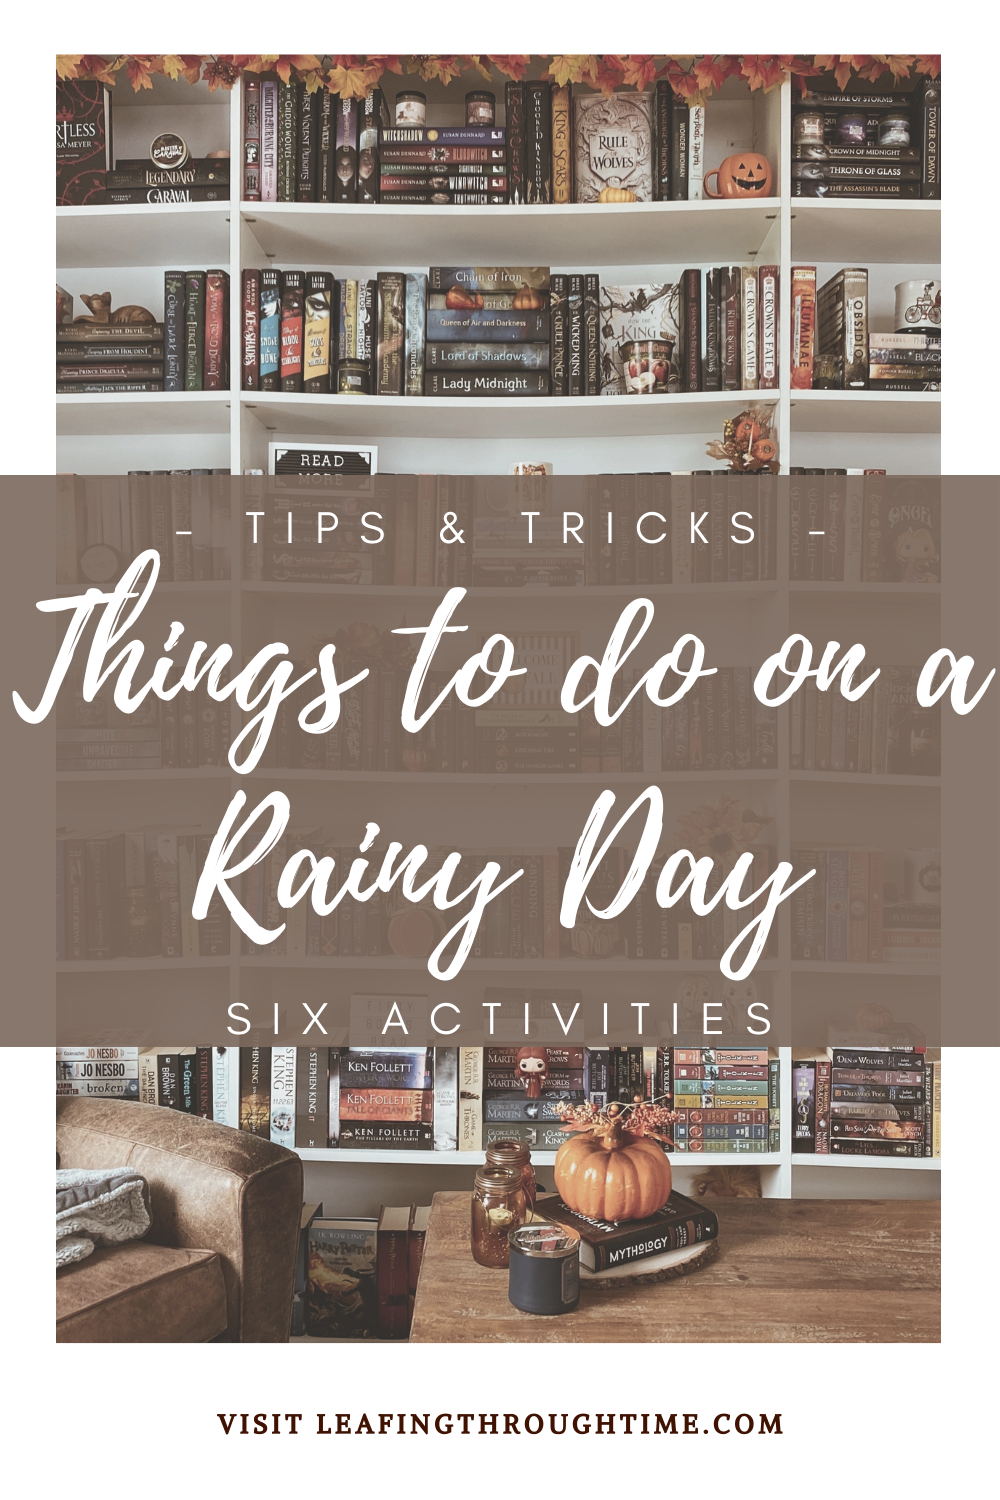 Things to do on a Rainy Day